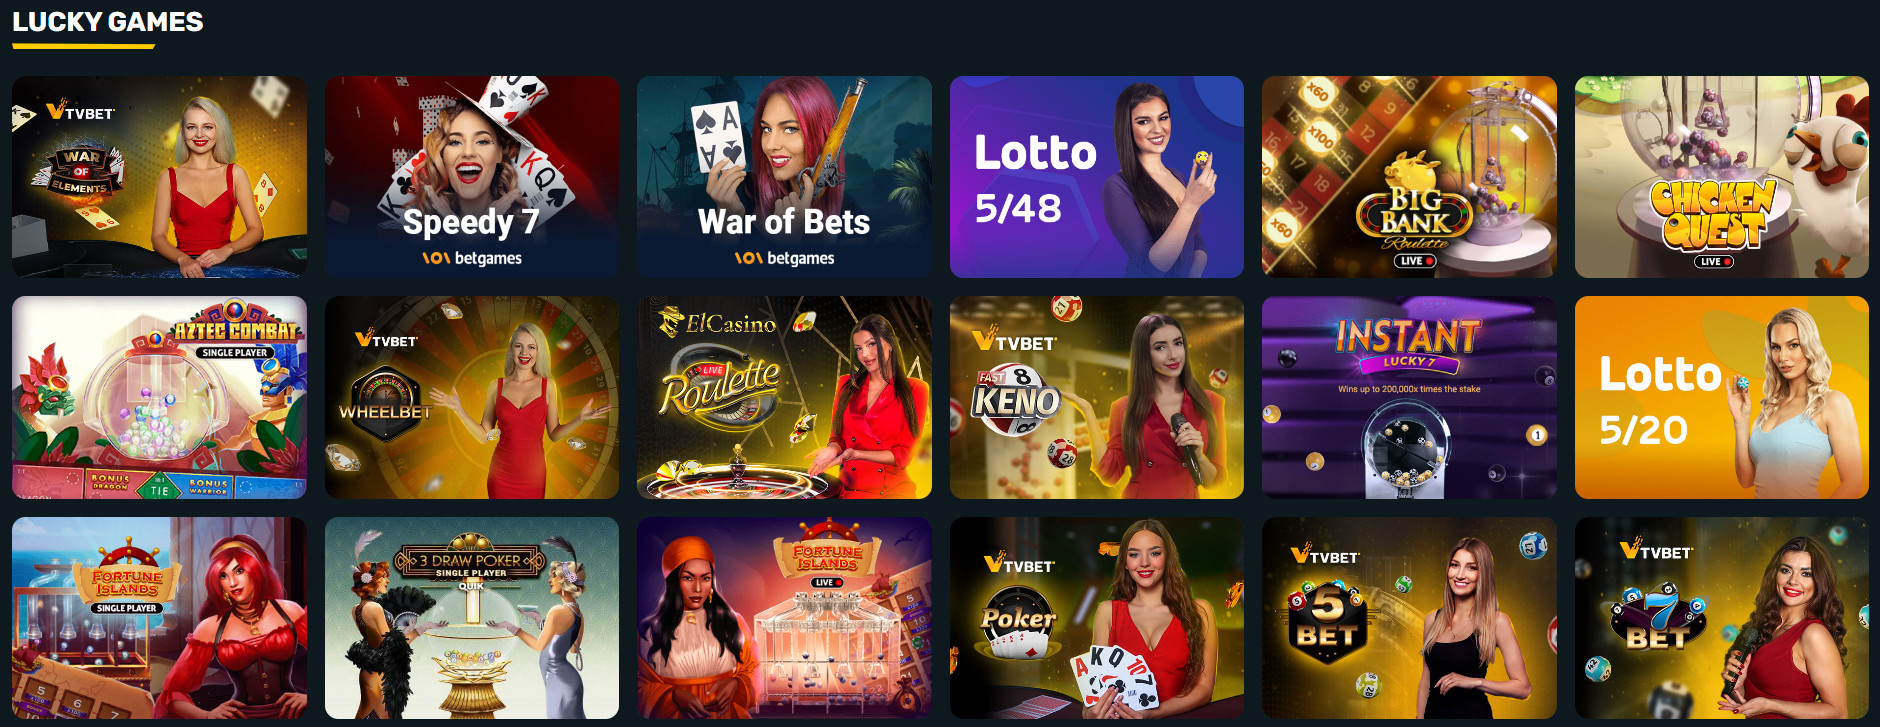 Lucky Games Section at Campeonbet Casino